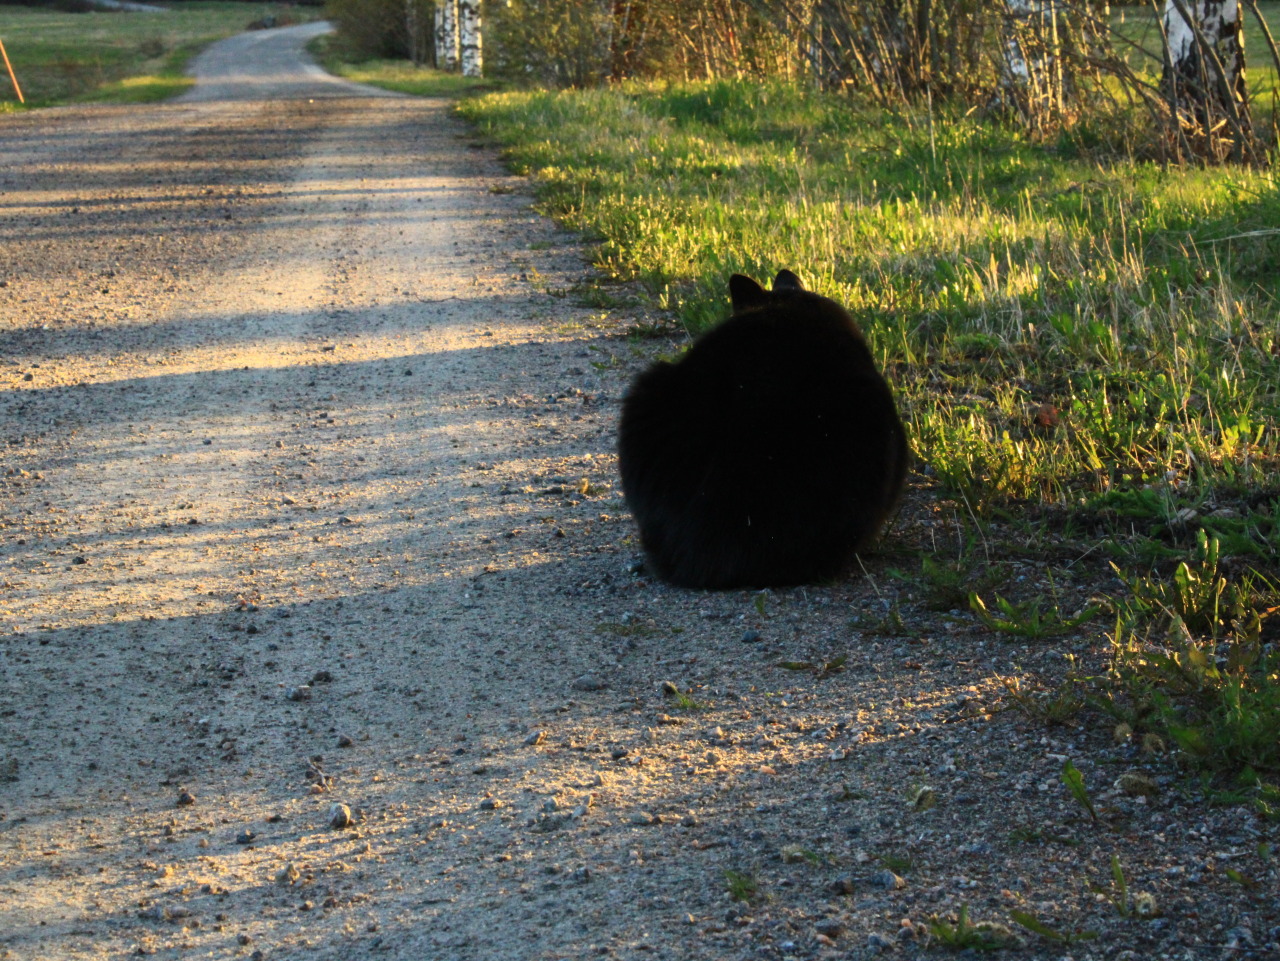 20.05-22Loaf of cat. - Vivera Rossi #black cat#cat loaf#road#sunset #shadow and light #spring#evening#photography#original photographers